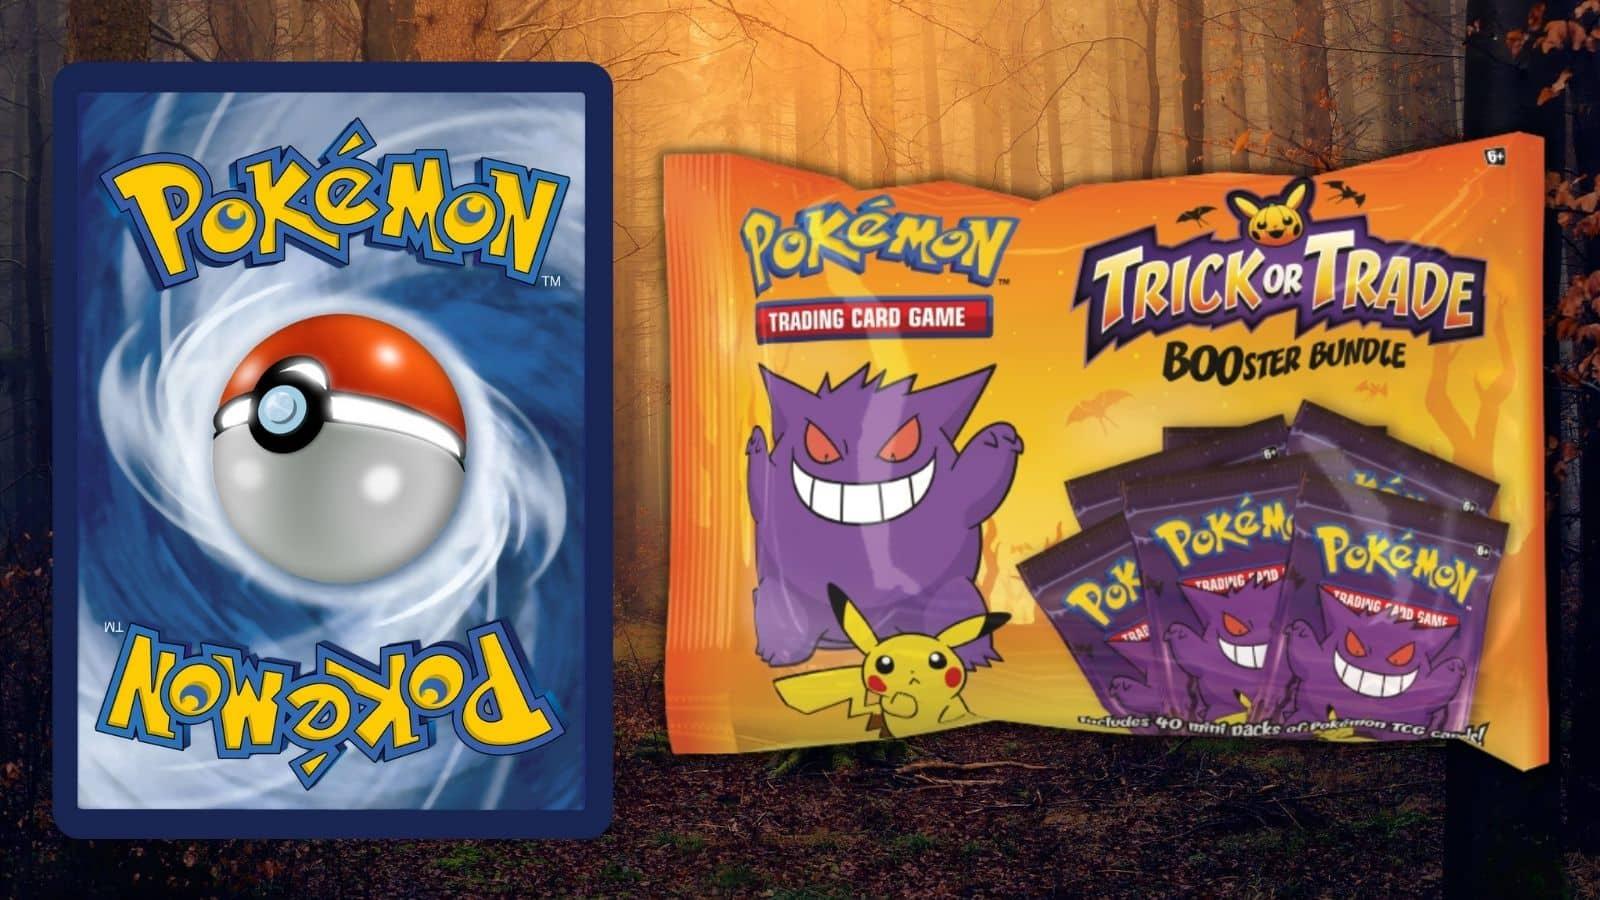 All Pokemon cards in TCG’s Trick or Trade BOOster Bundle Halloween Set